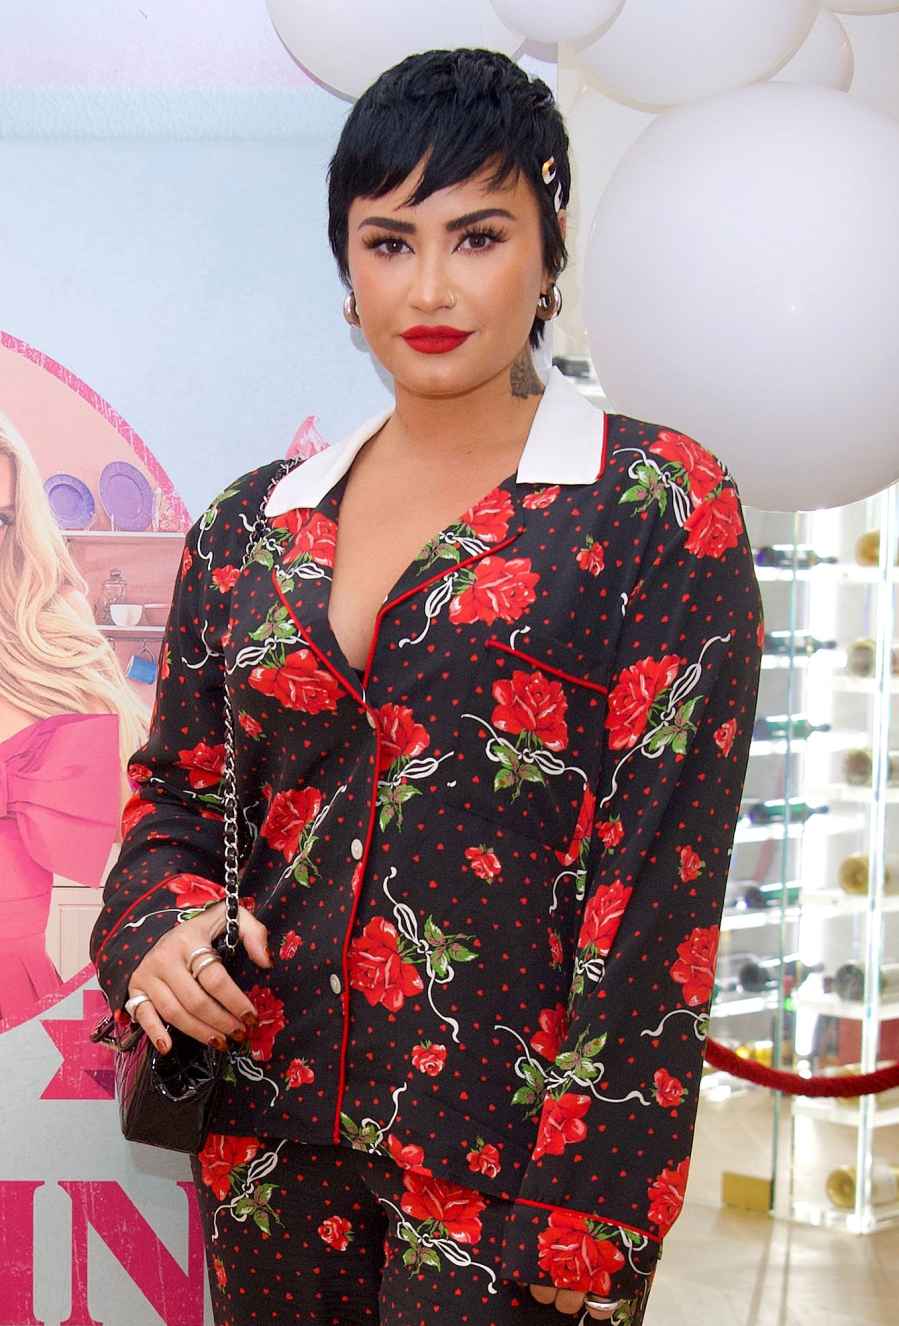 Demi Lovato Celebrities Who Manifested Their Dream Roles and Collaborations